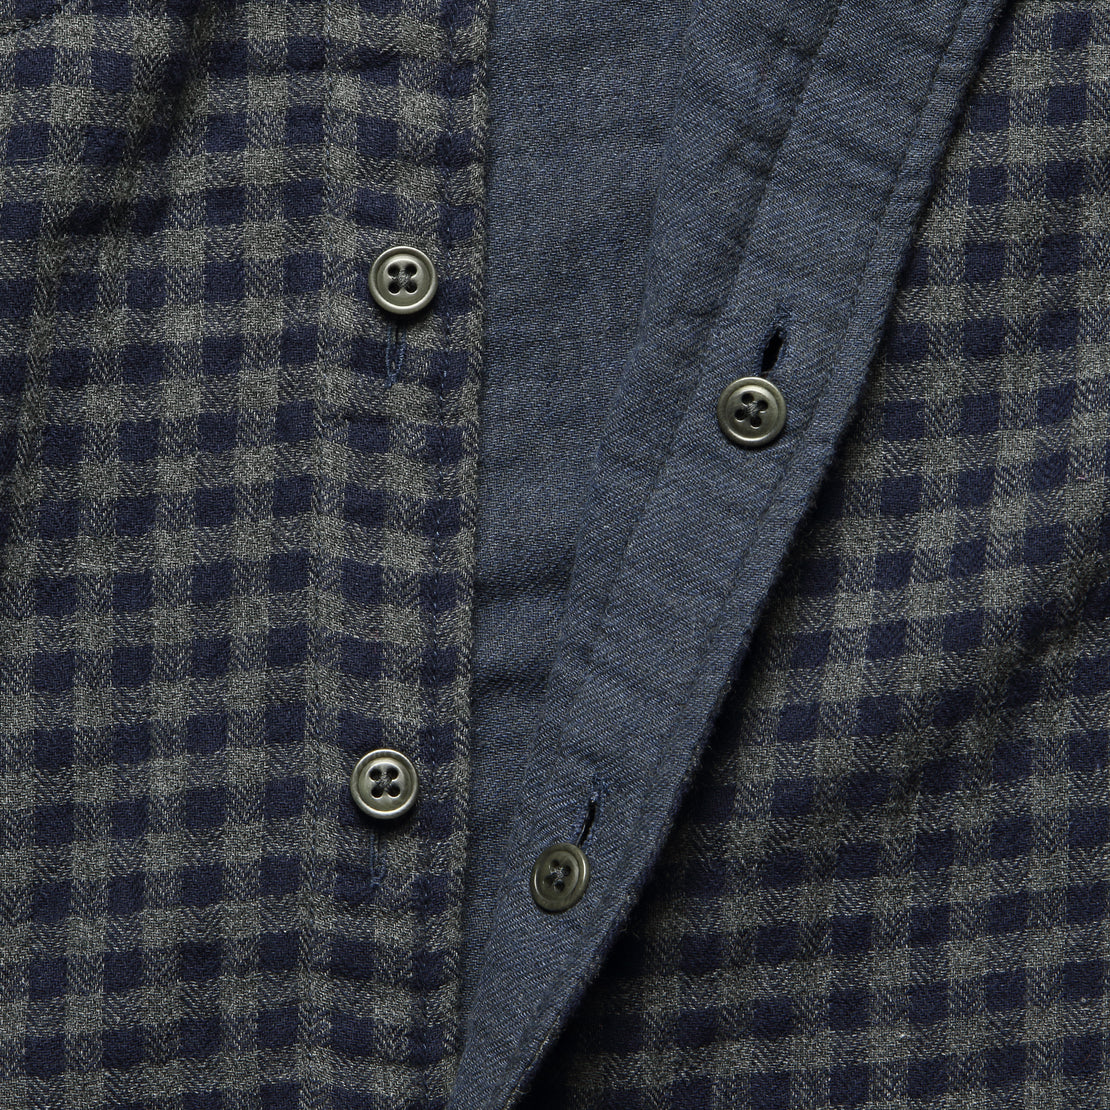 Belmar Workshirt - Charcoal Navy Check - Faherty - STAG Provisions - Tops - L/S Woven - Plaid